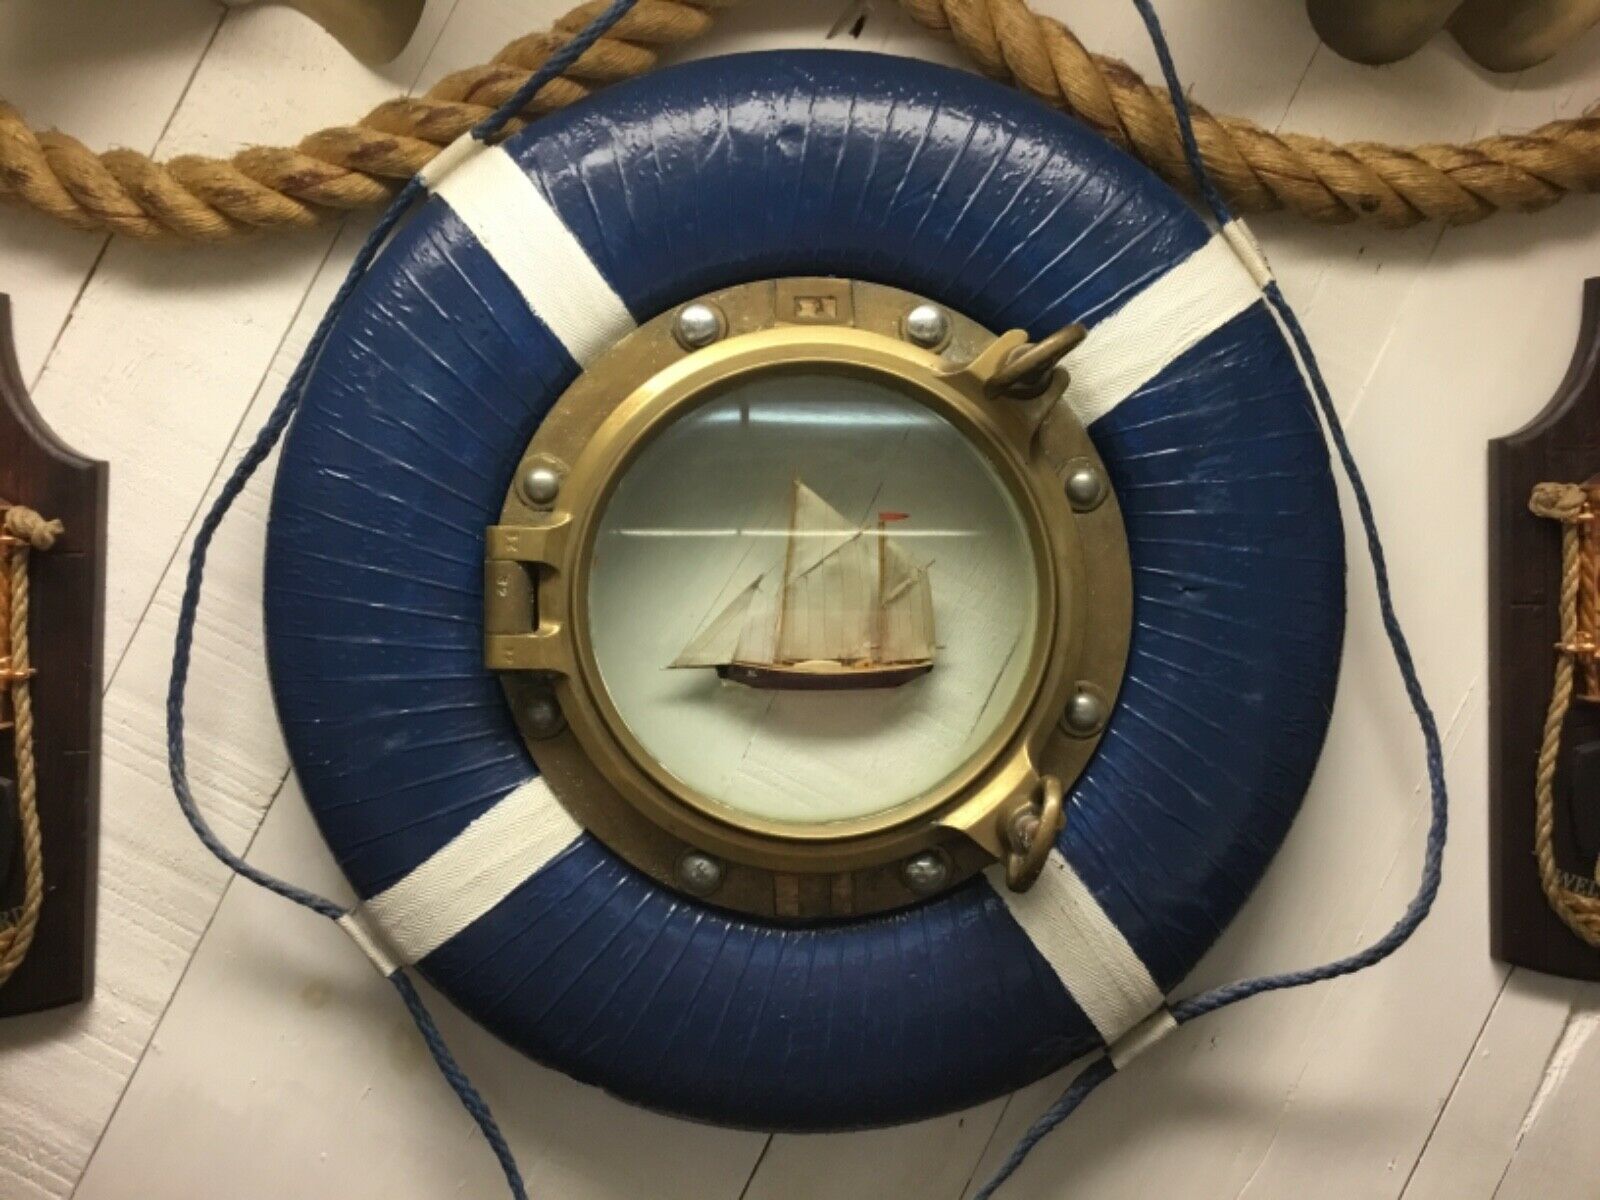 Authentic Brass Porthole W Glass From Shipyard - Really Opens, Beautiful!